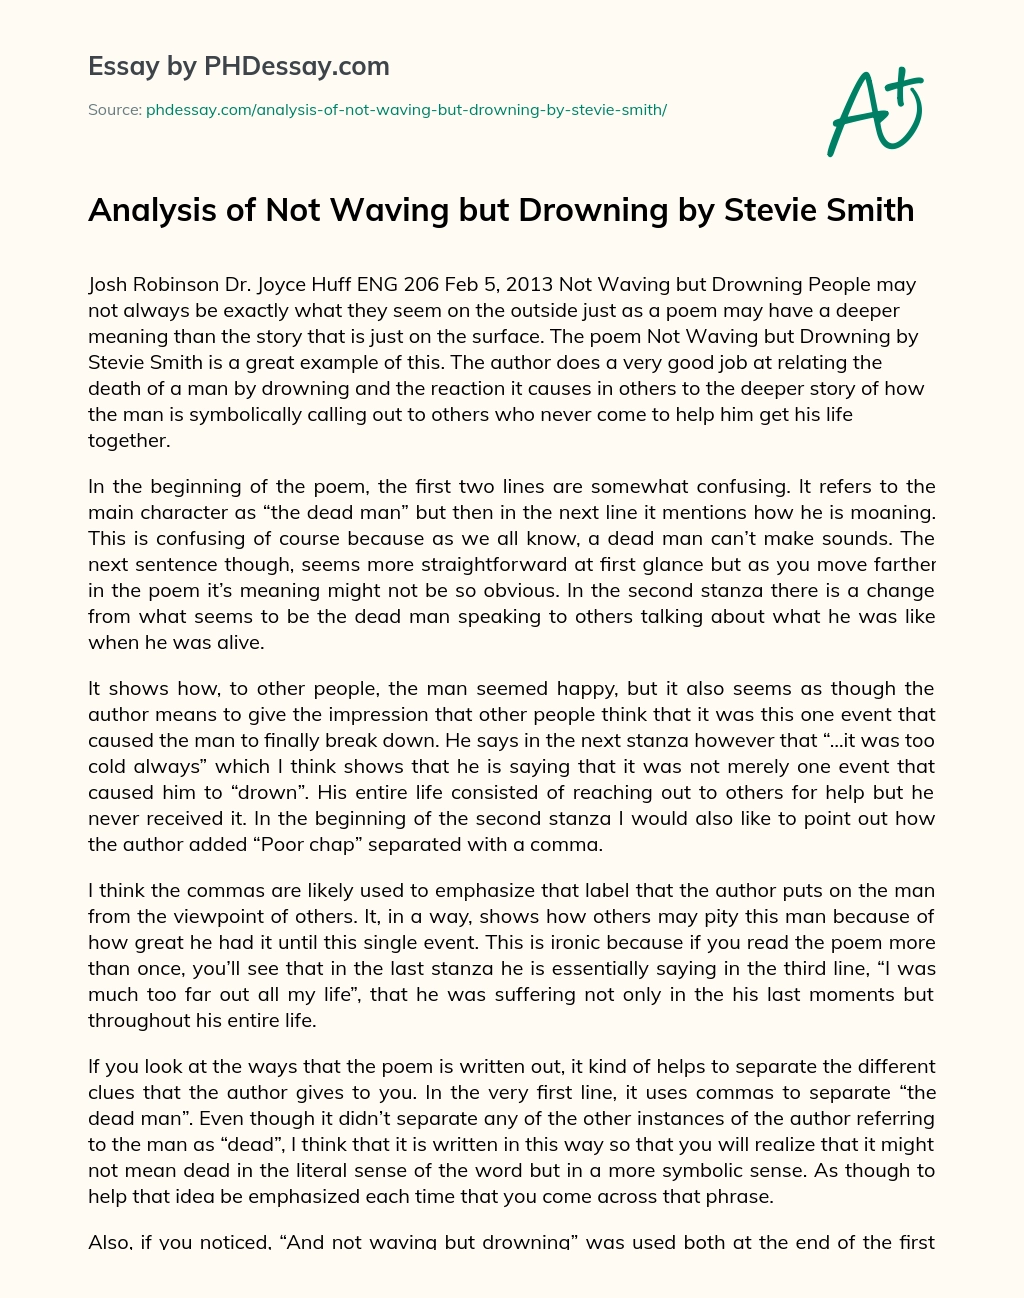 Analysis of Not Waving but Drowning by Stevie Smith essay